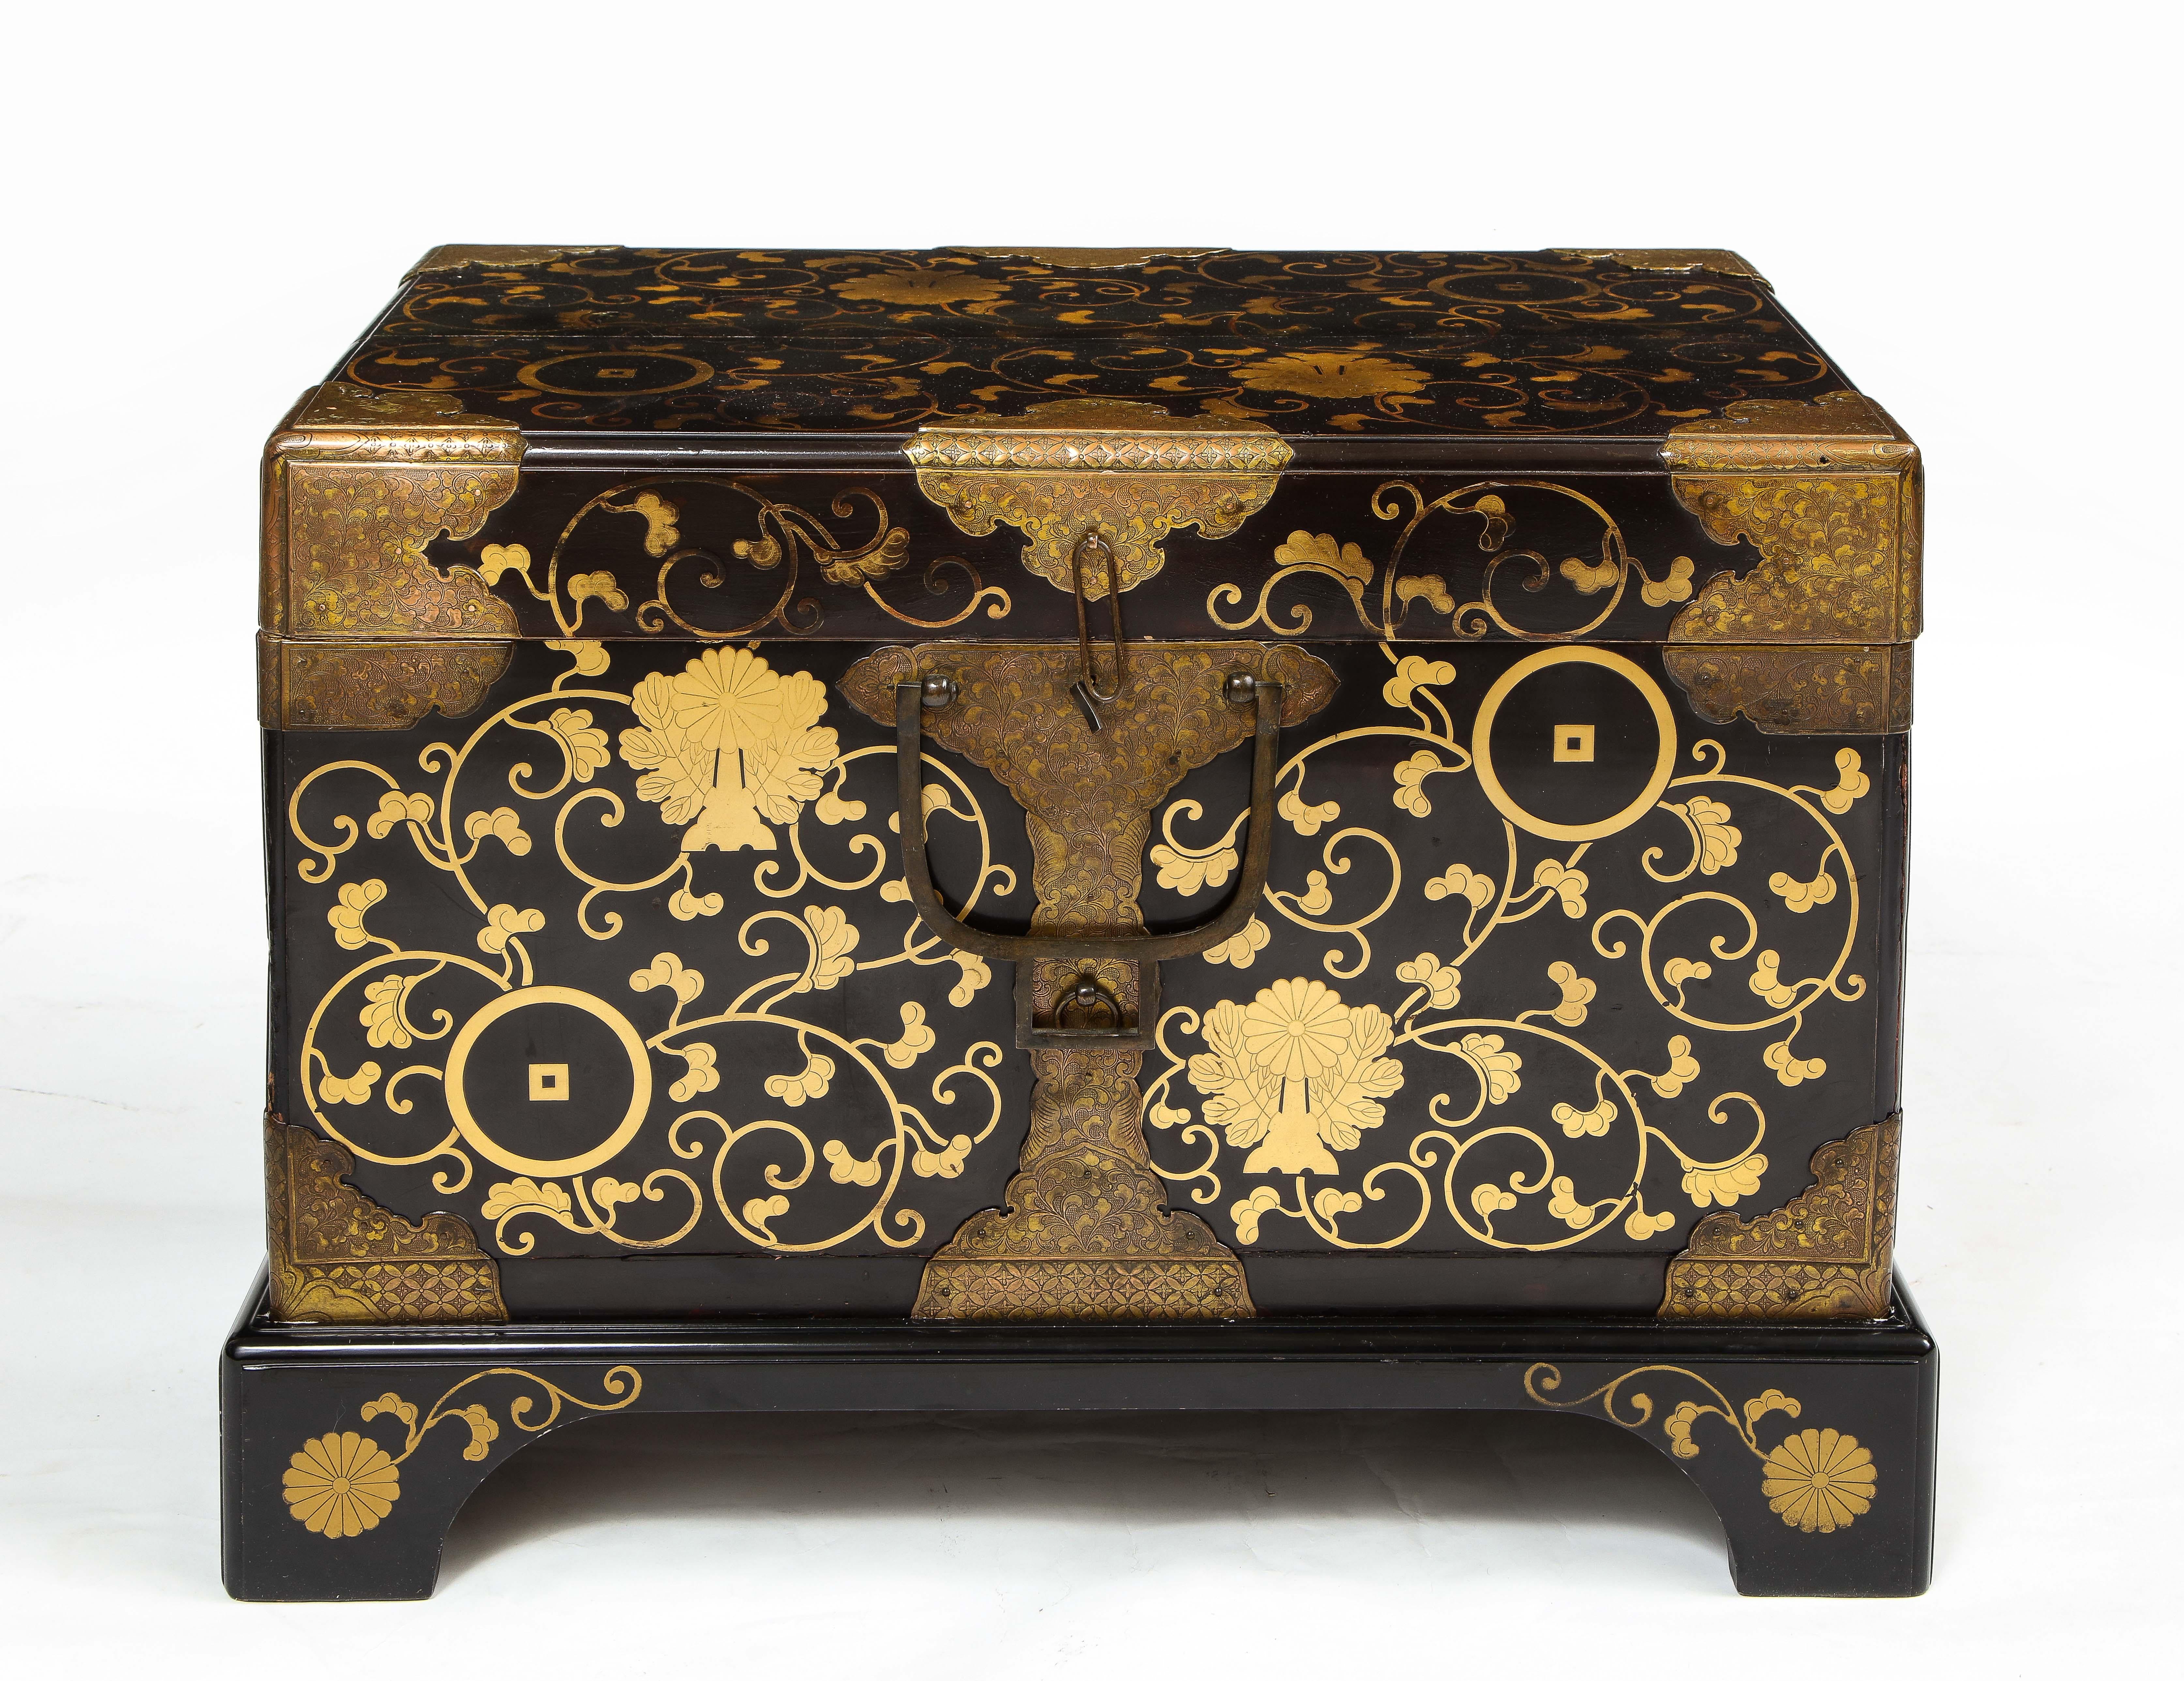  Pair of 19th Century Japanese Meiji Period Dore Bronze Mounted Lacquered Chests In Fair Condition For Sale In New York, NY